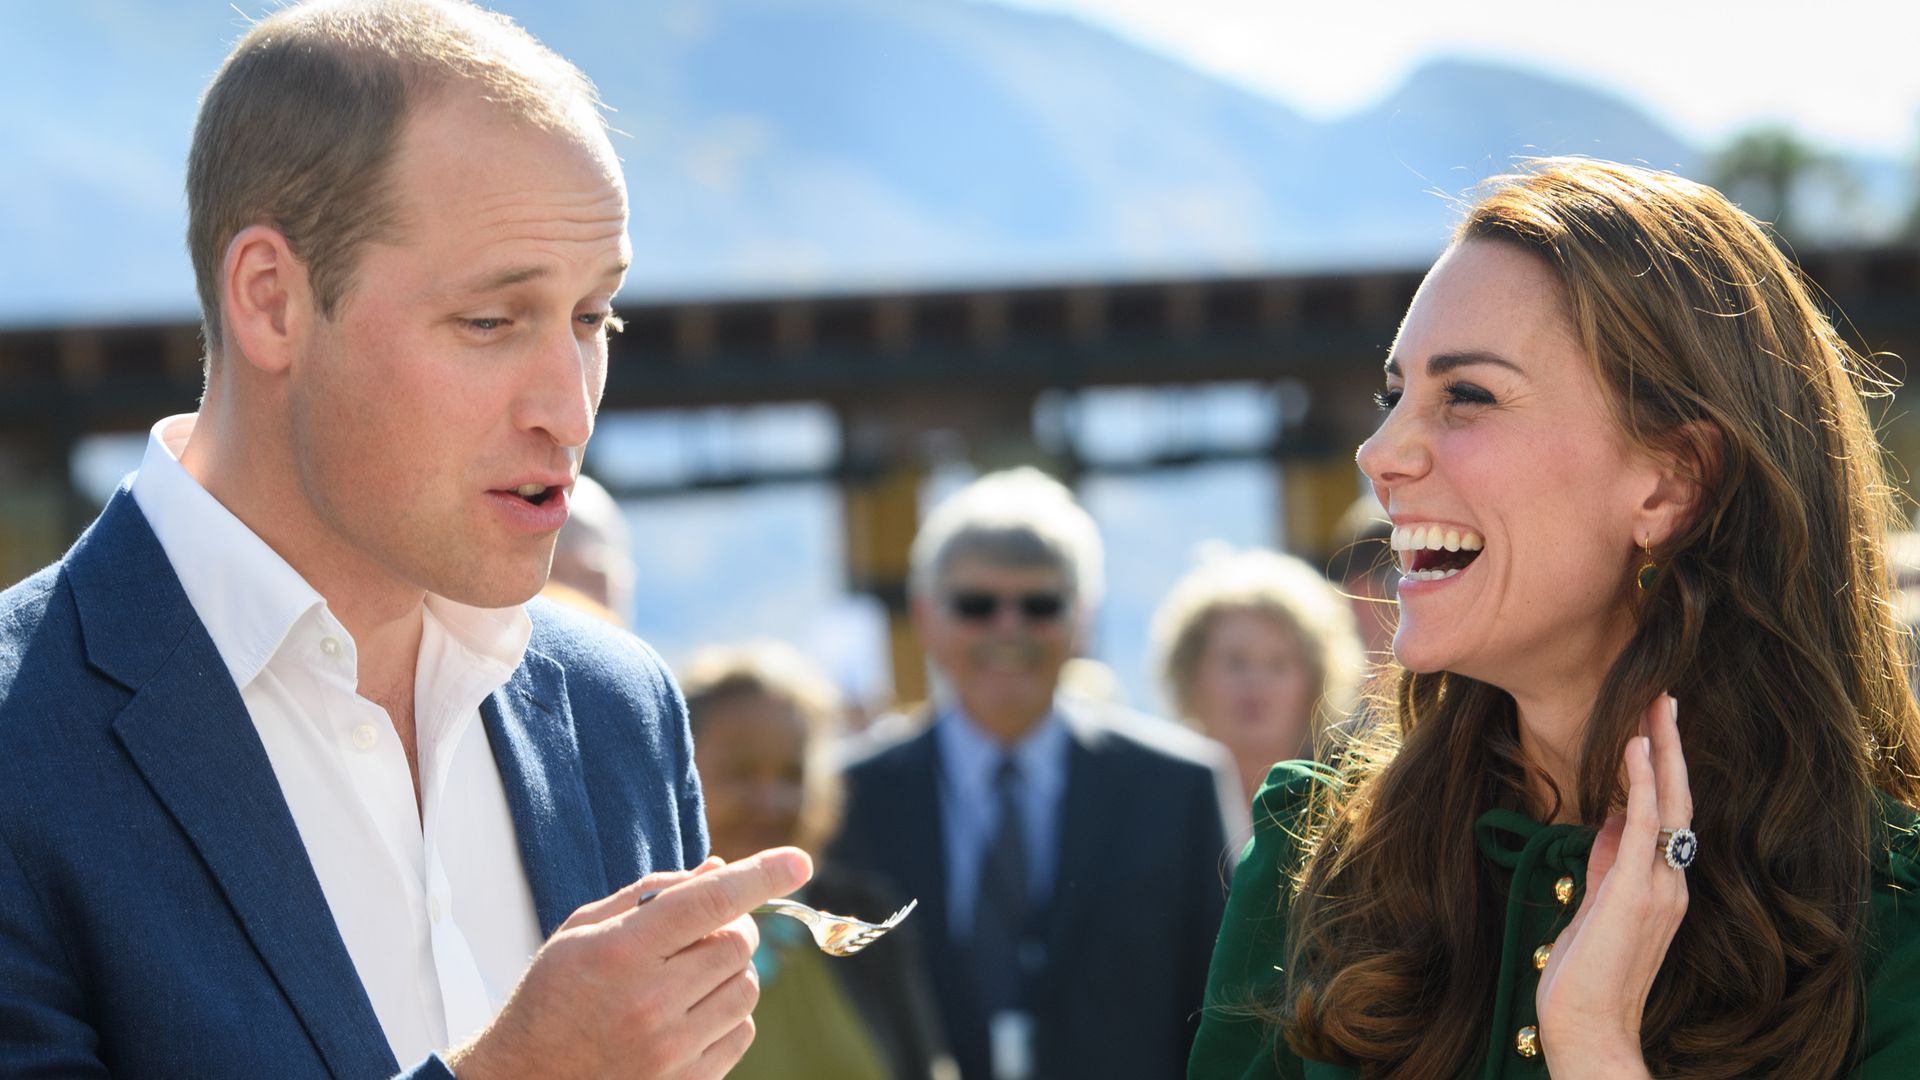 Prince William and Princess Kate sample Indian food cooked by Vikram Vij at visit Mission Hill Winery in 2016